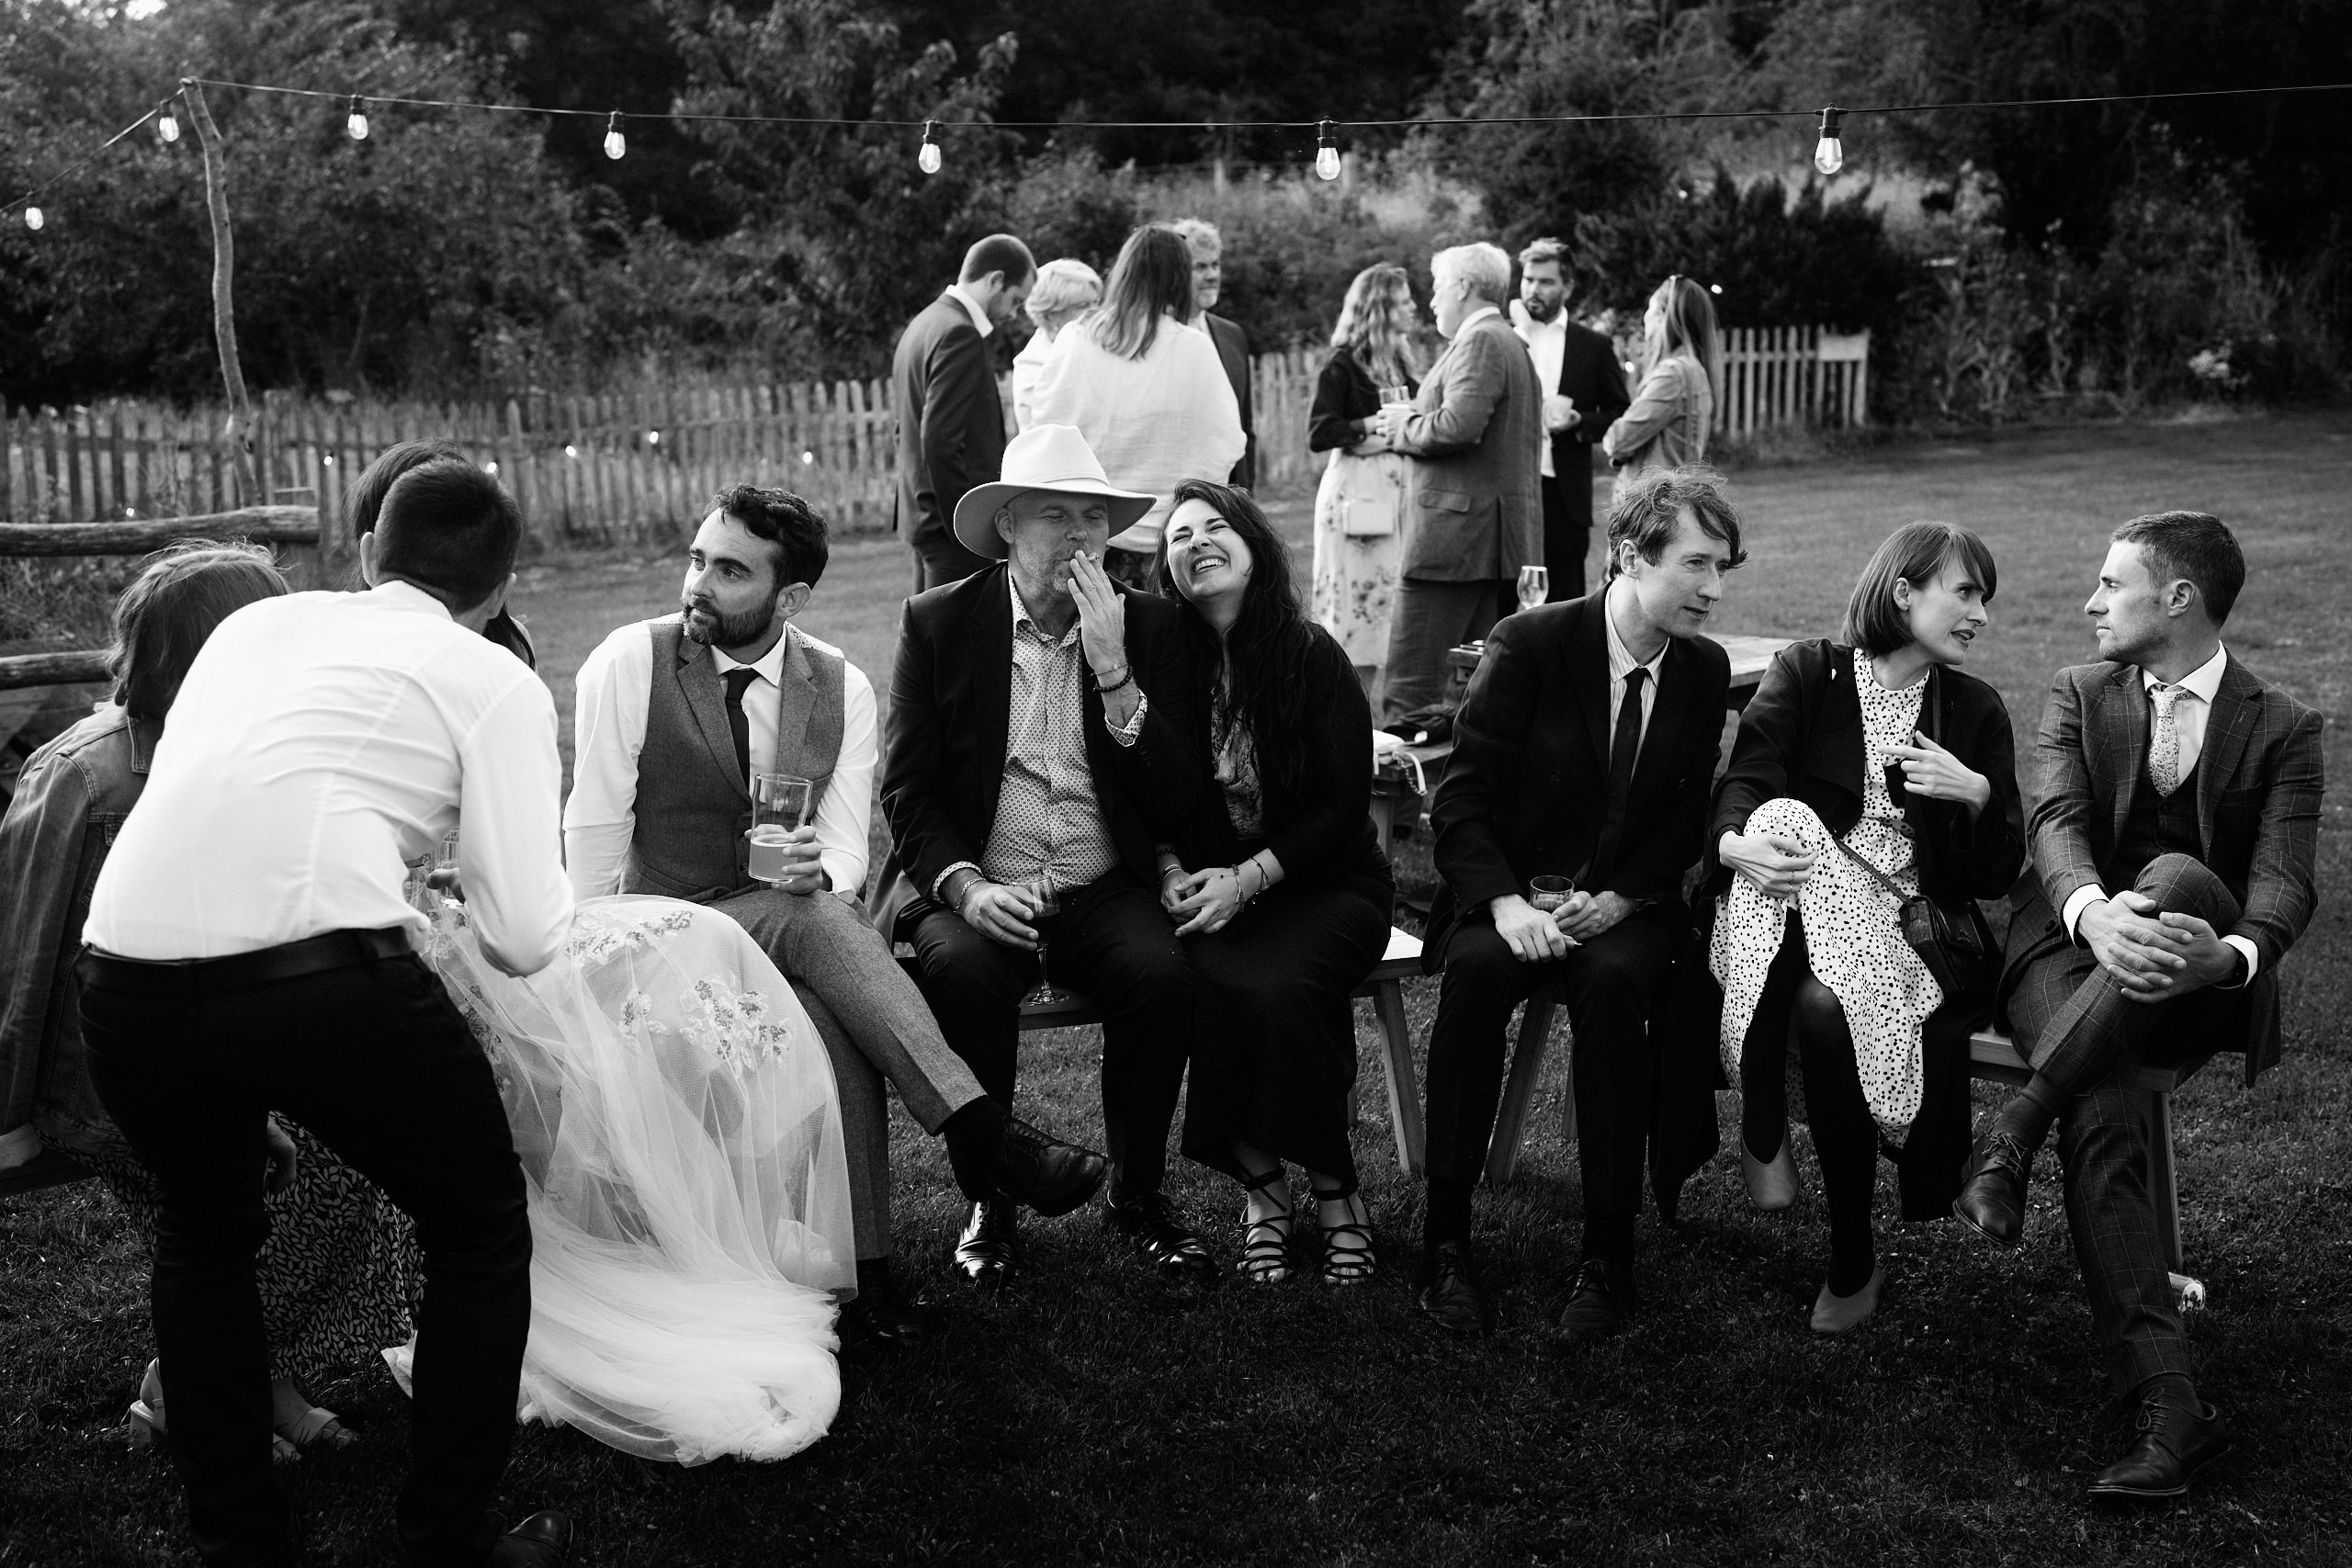 A black and white picture showing a crowd at a wedding.